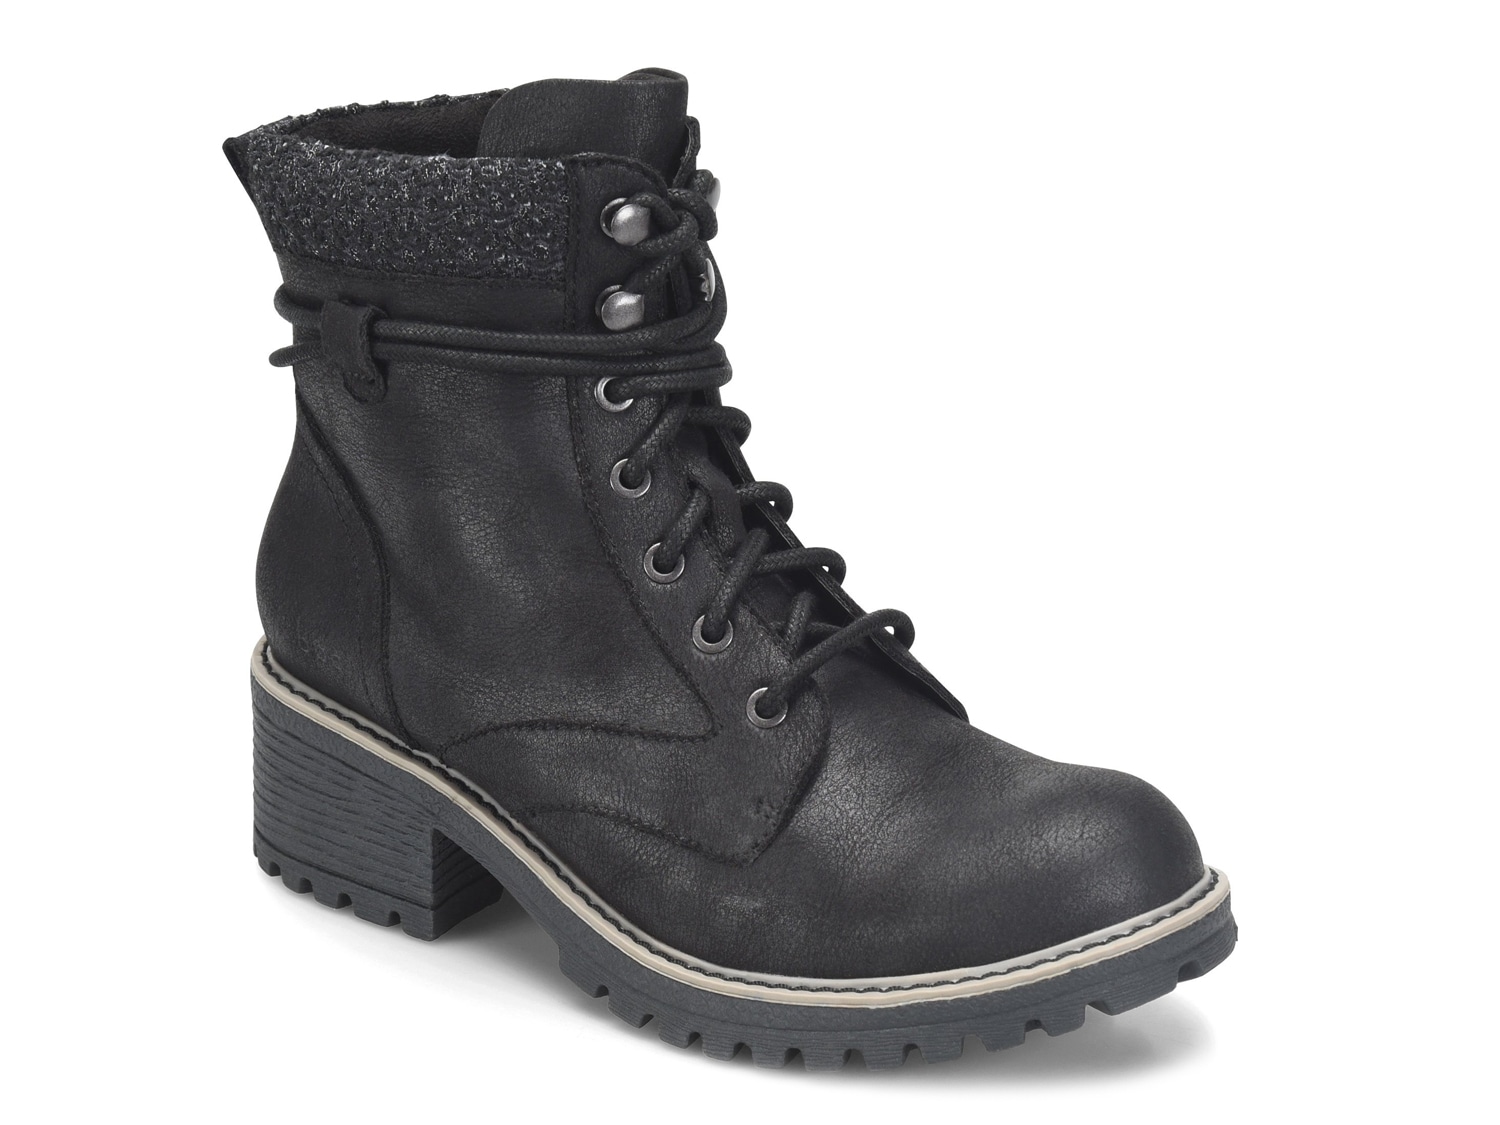 b.o.c Arklow Combat Boot - Free Shipping | DSW